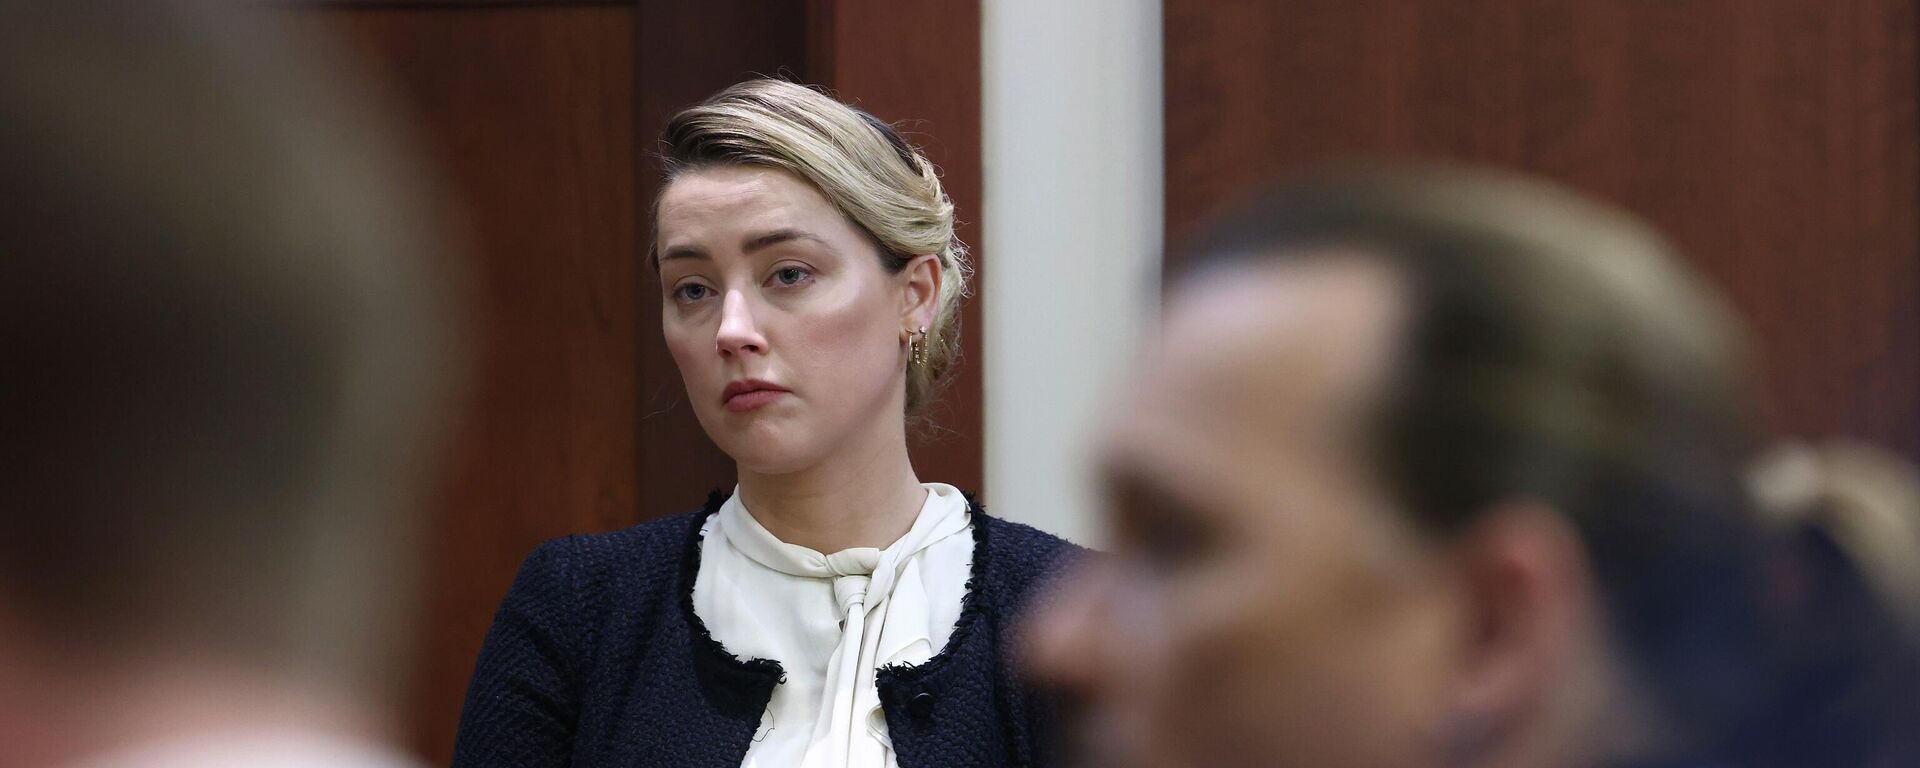 Actor Amber Heard returns after a break in the courtroom at the Fairfax County Circuit Court in Fairfax, Va., Thursday, May 5, 2022. - Sputnik International, 1920, 17.05.2022